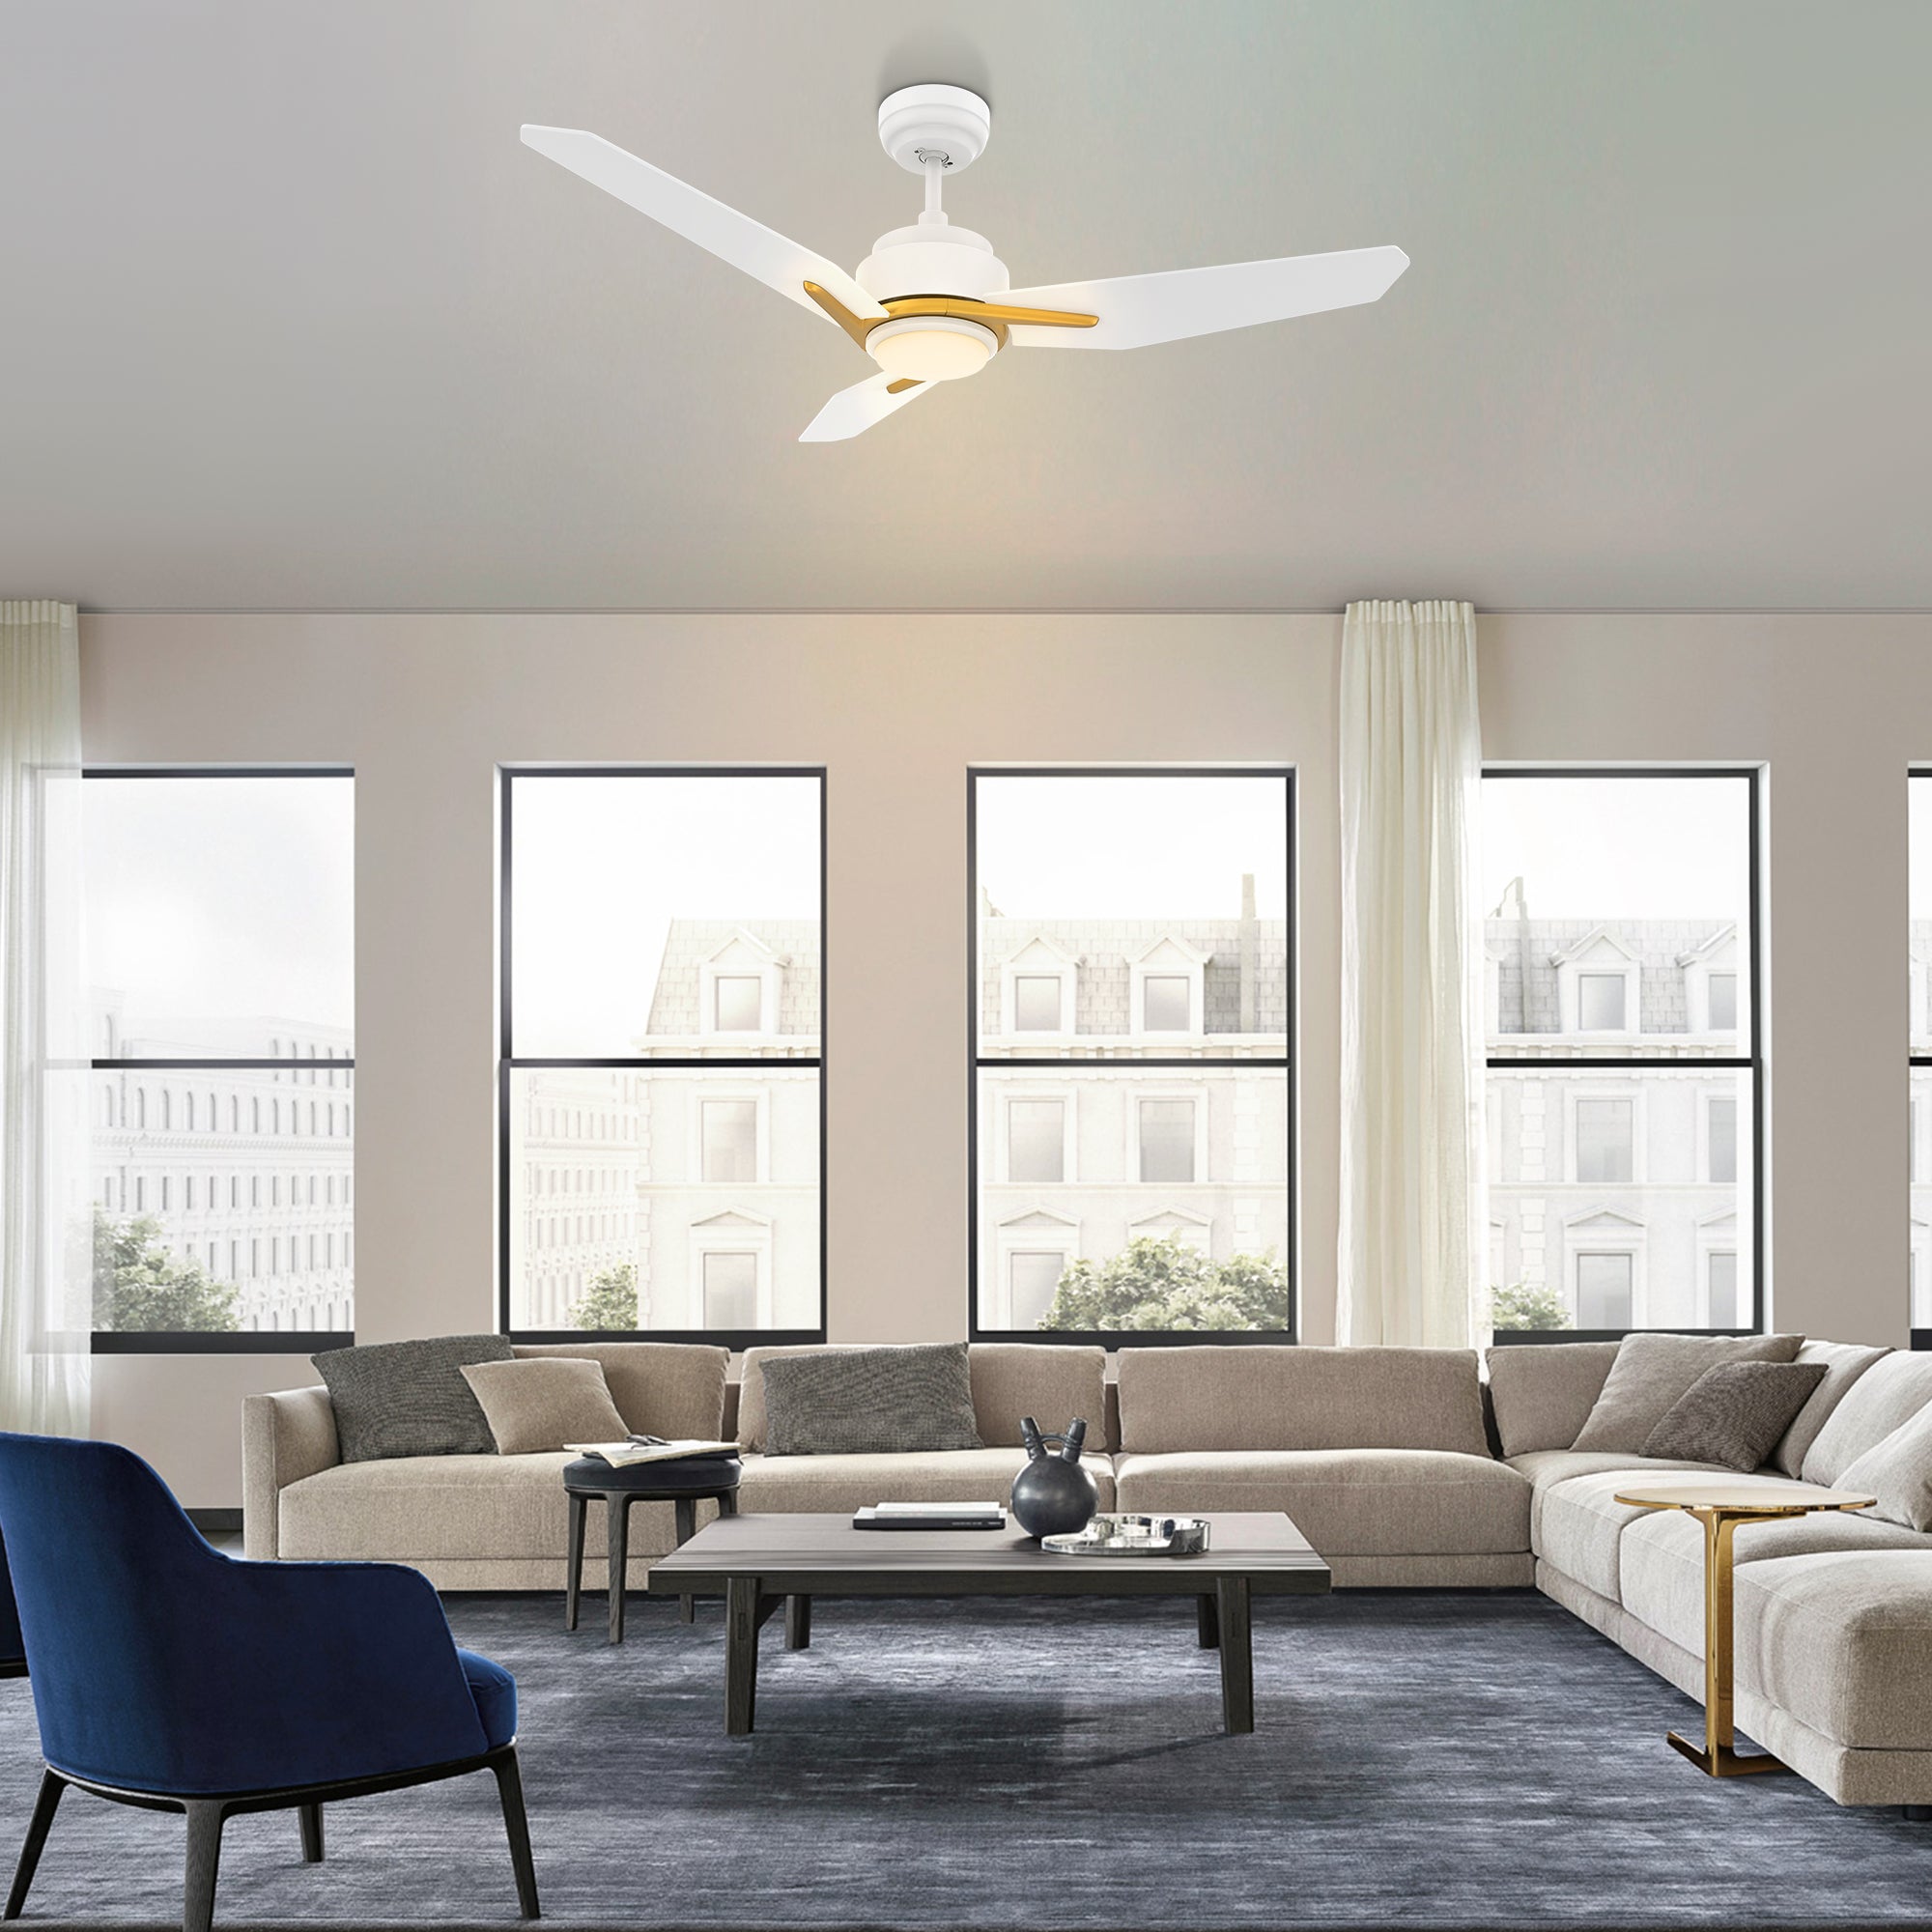 This Tilbury 52'' smart ceiling fan keeps your space cool, bright, and stylish. It is a soft modern masterpiece perfect for your large indoor living spaces. This Wifi smart ceiling fan is a simplicity designing with White finish, use elegant Plywood blades and has an integrated 4000K LED cool light. The fan features Remote control, Wi-Fi apps, Siri Shortcut and Voice control technology (compatible with Amazon Alexa and Google Home Assistant ) to set fan preferences.#color_White